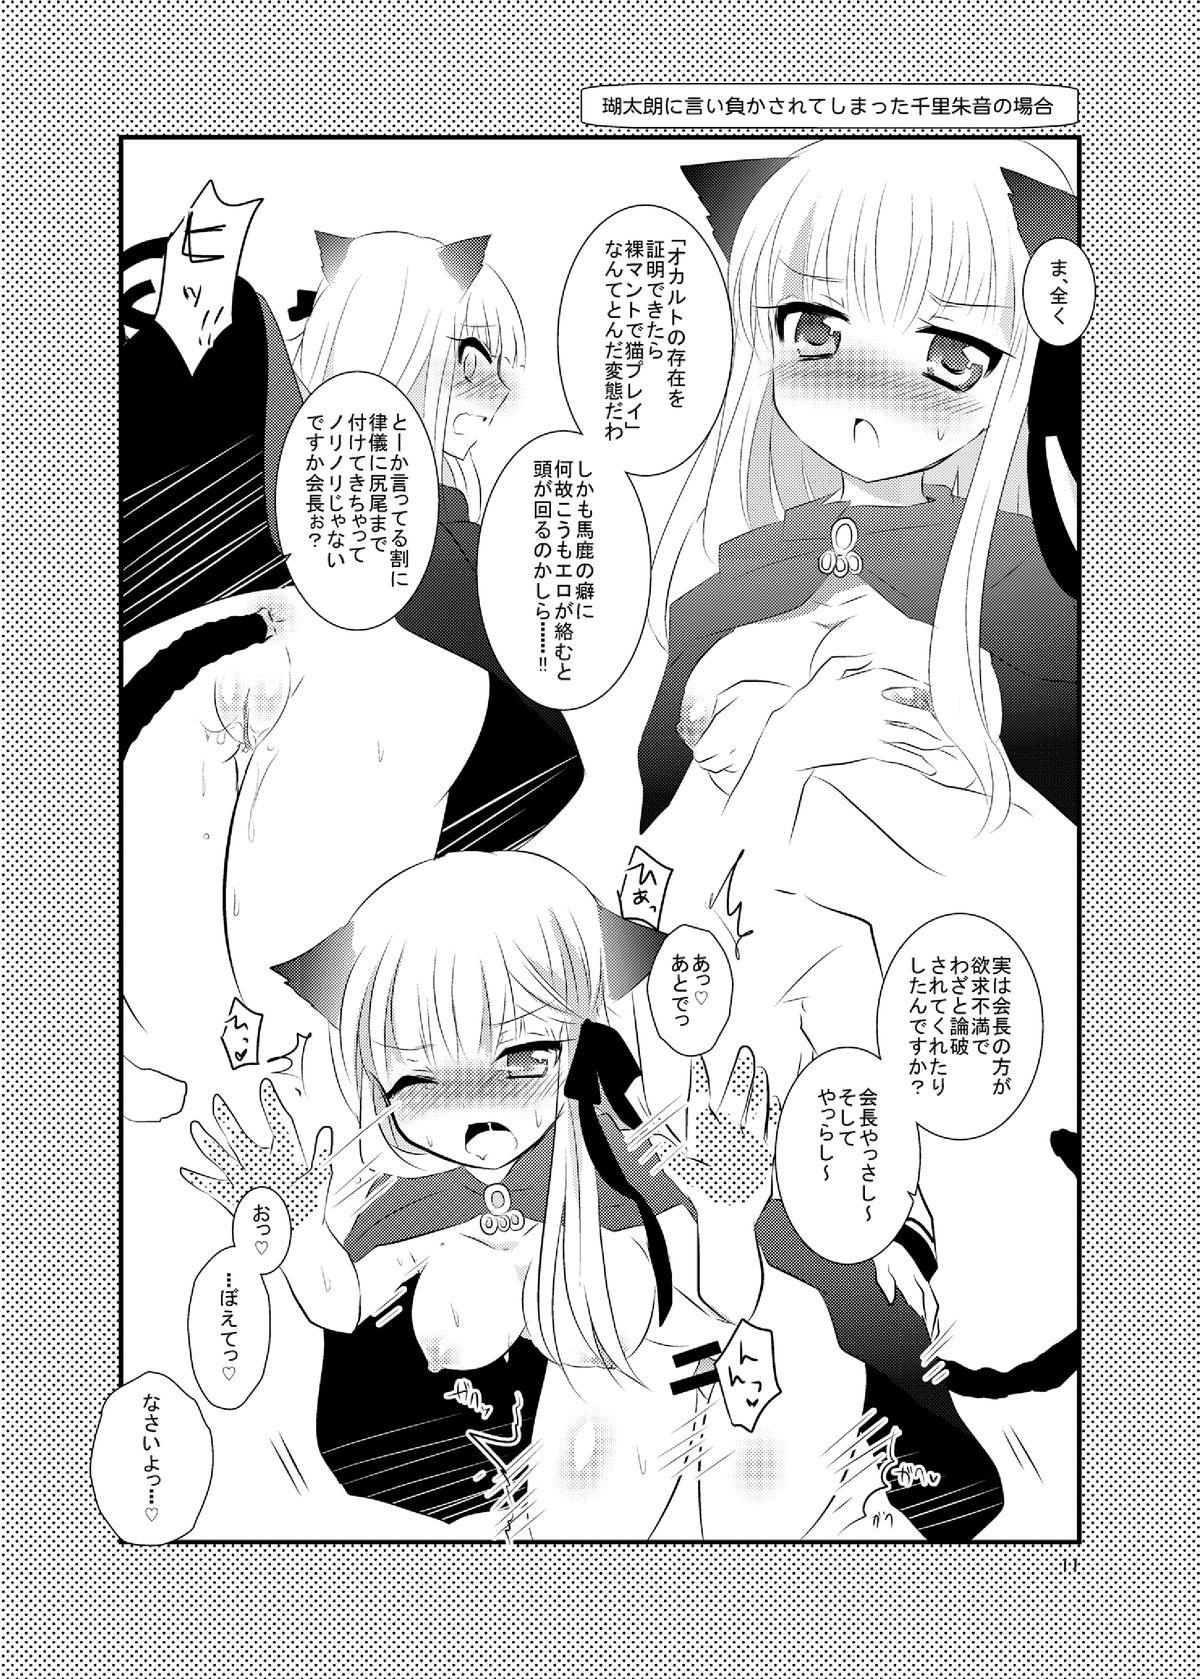 Play Harvest you! - Rewrite Blowjob - Page 10